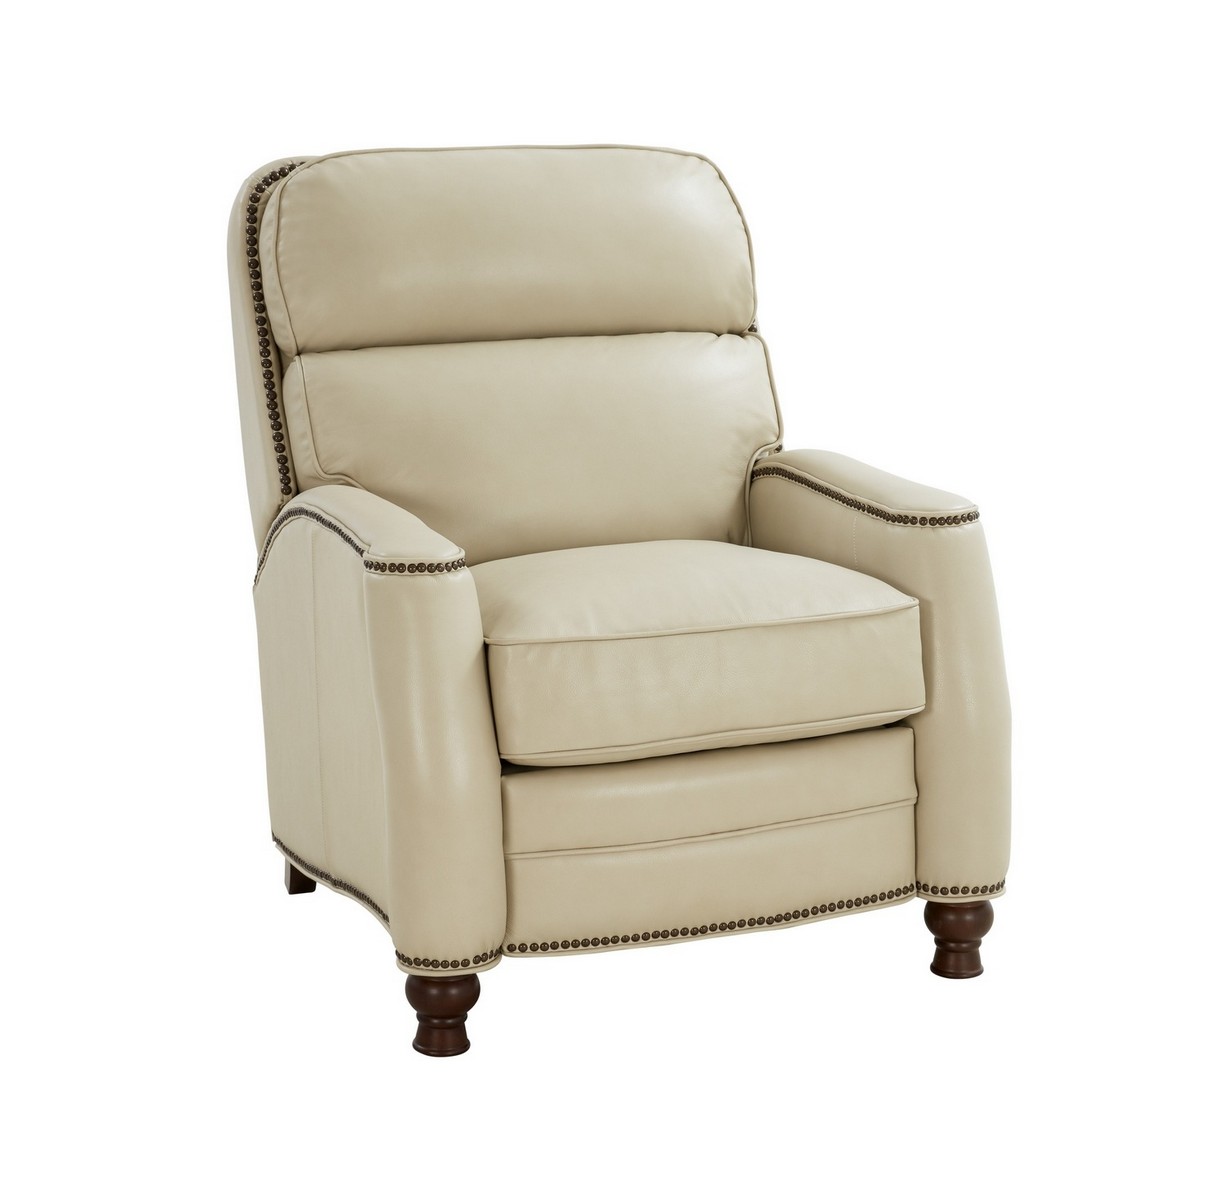 Barcalounger Townsend Recliner Chair - Barone Parchment/All Leather